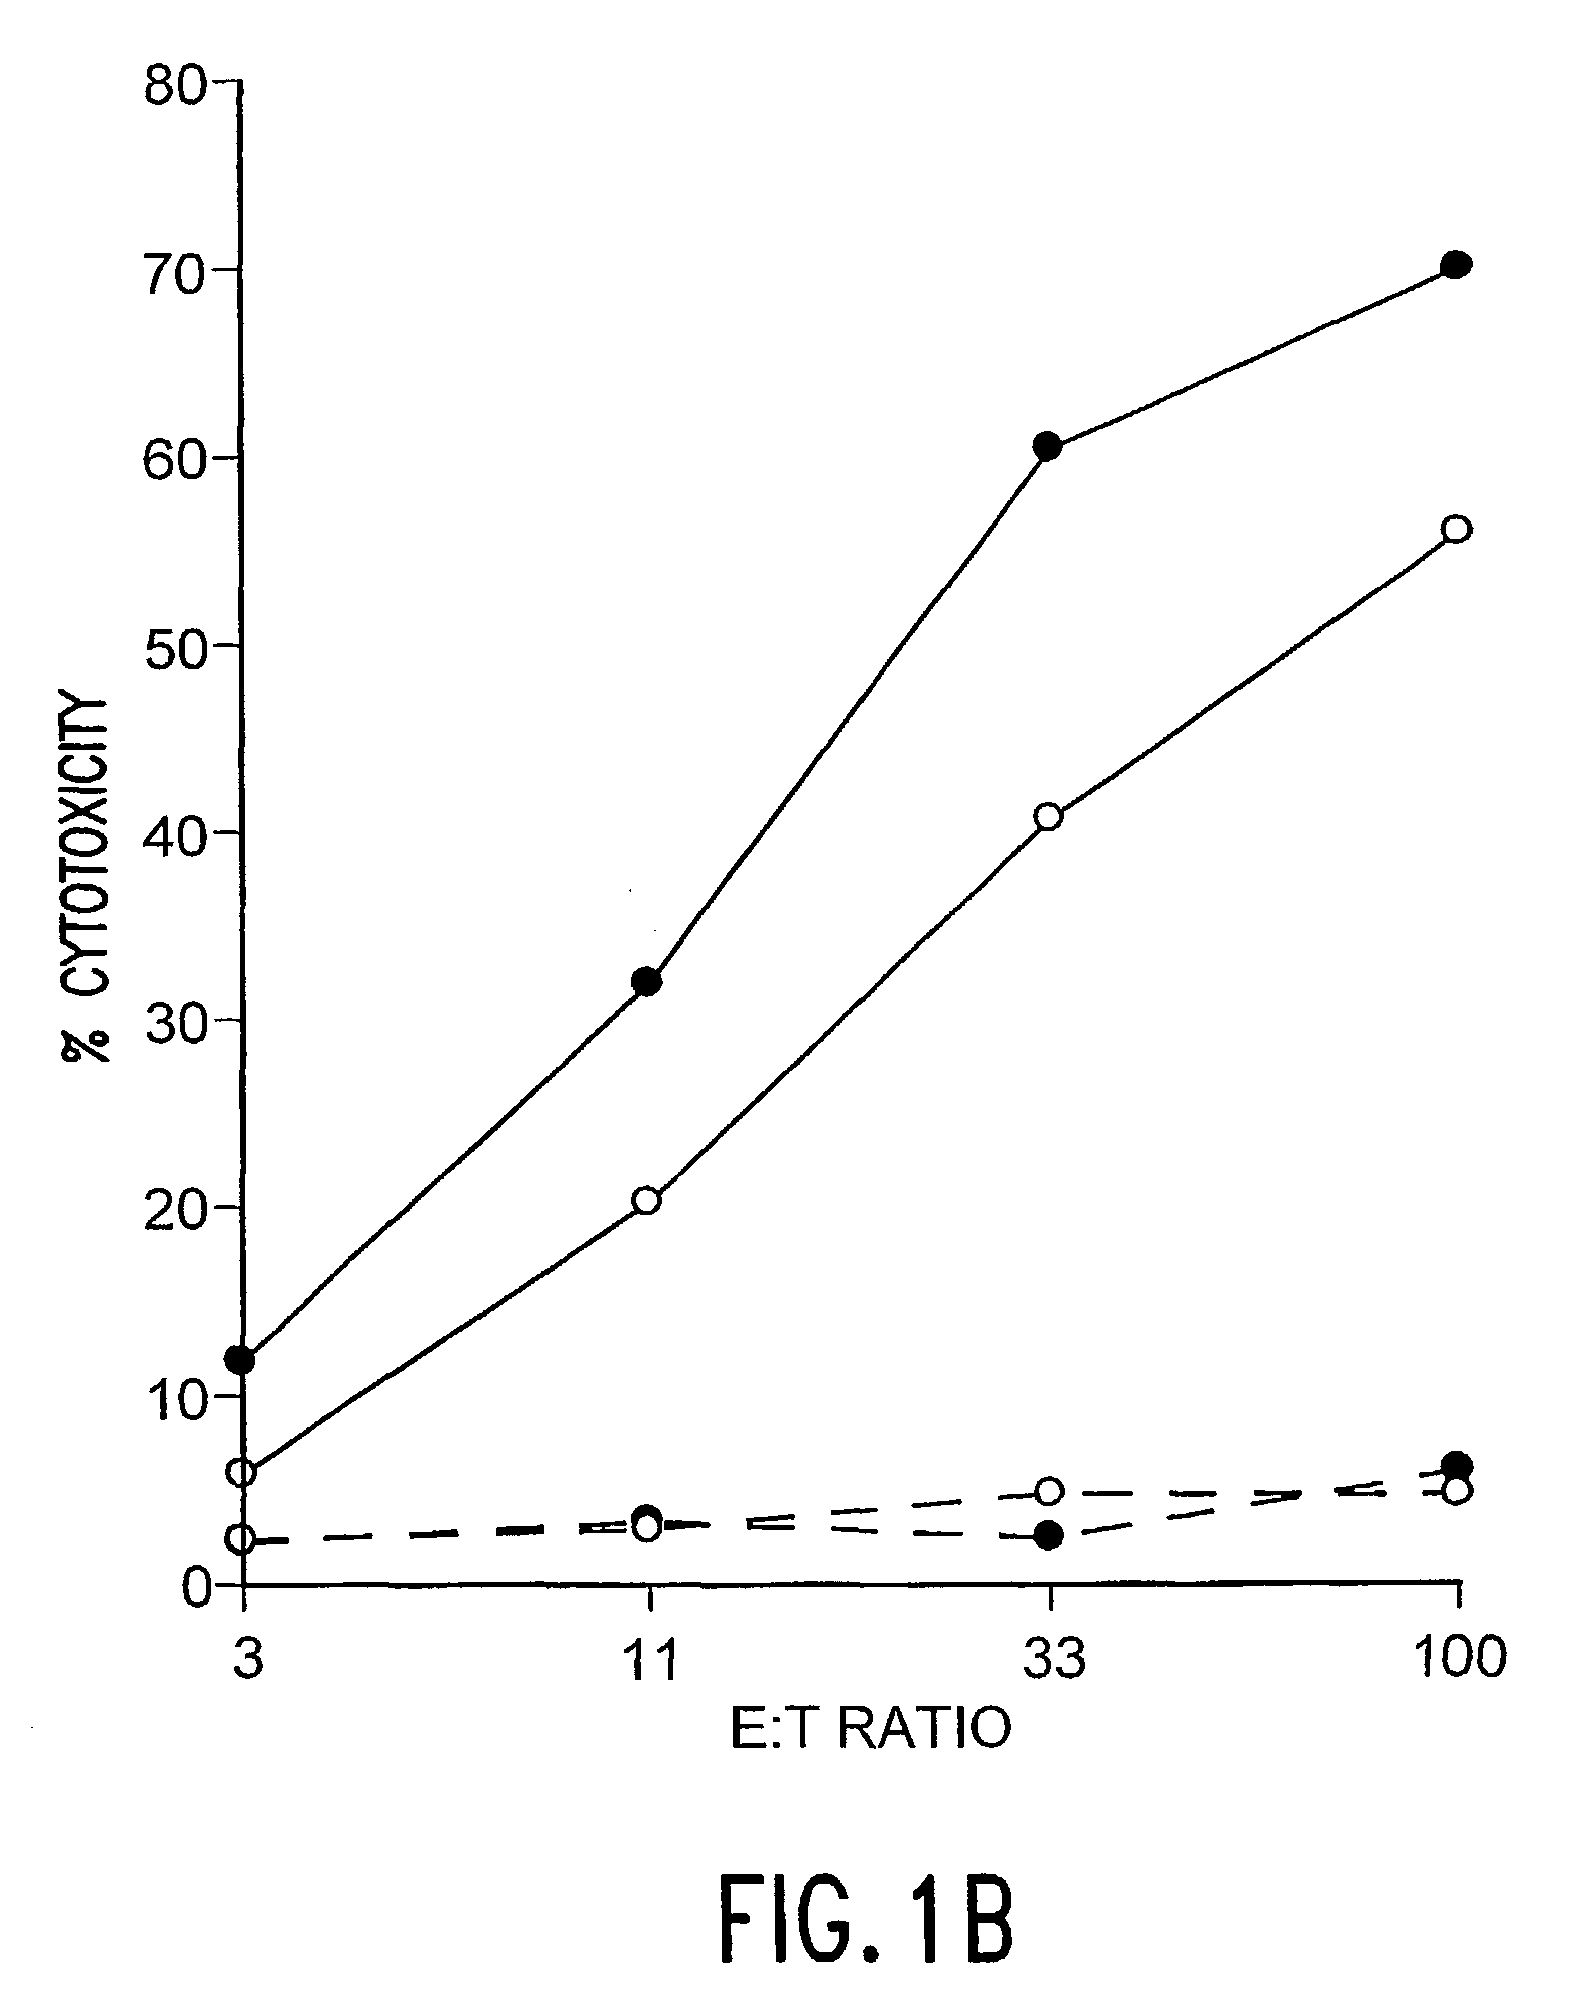 QS-21 and IL-12 as an adjuvant combination